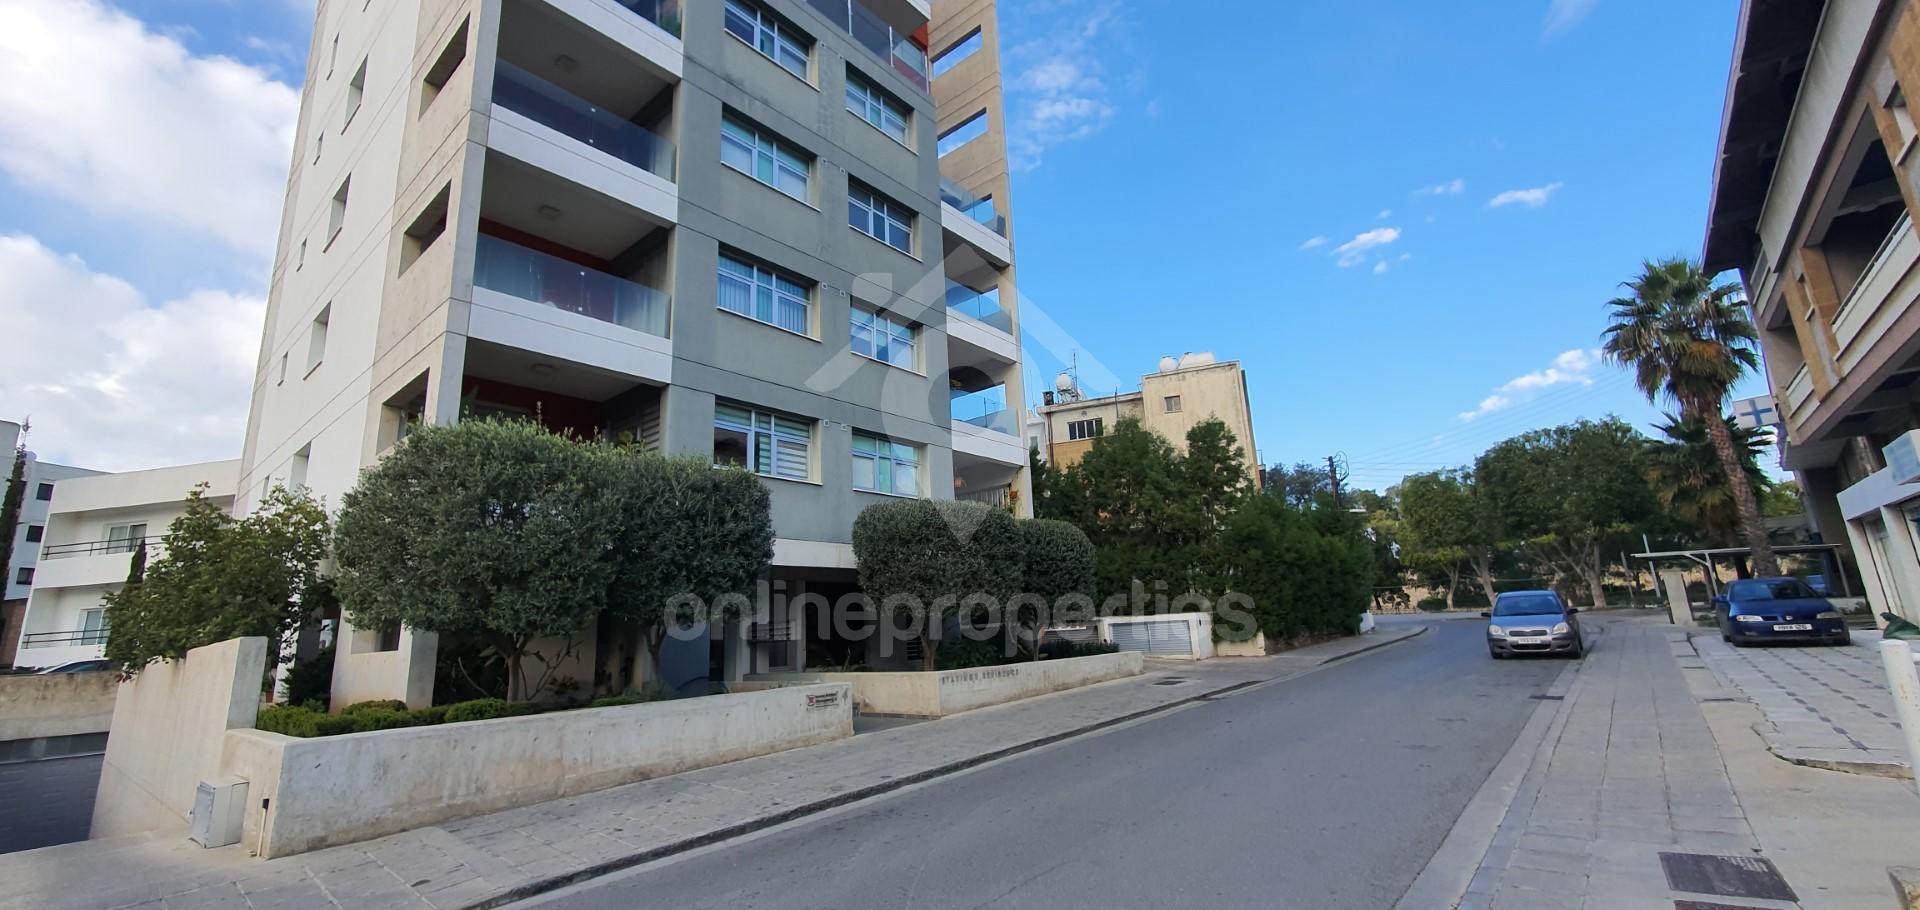 Featured 3-bedroom whole floor apartment with an office space